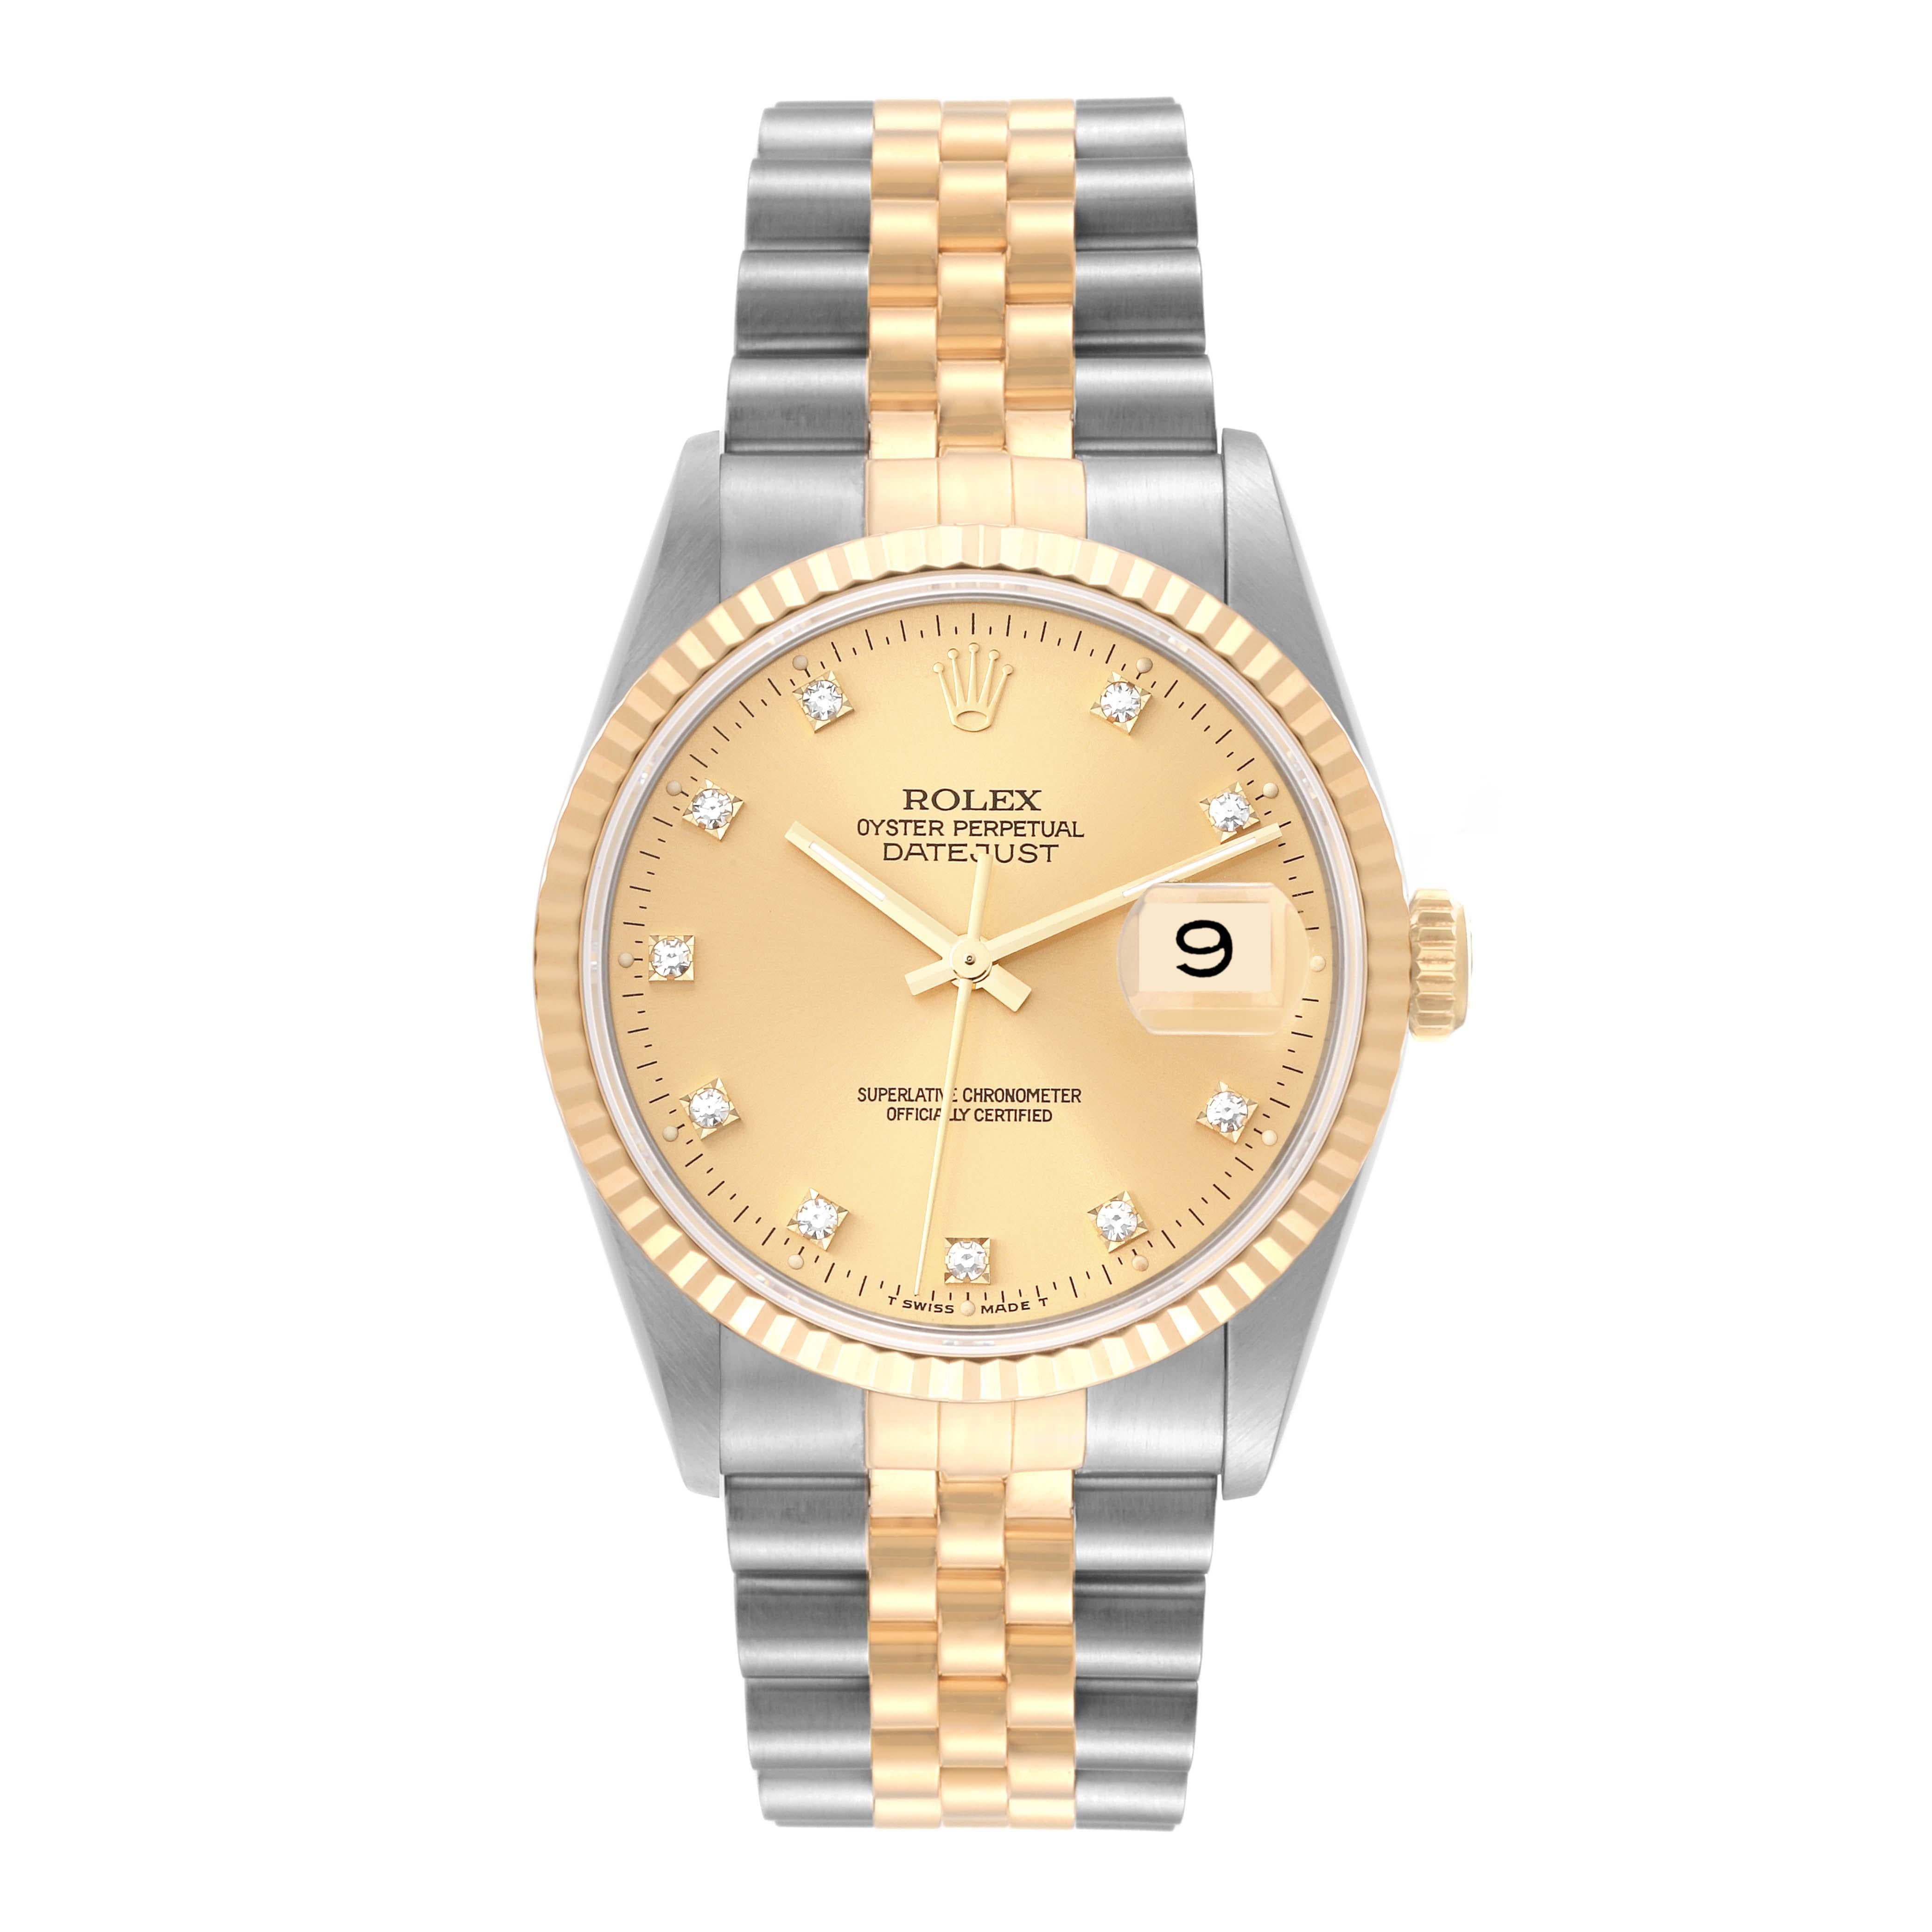 Rolex Datejust Champagne Diamond Dial Steel Yellow Gold Mens Watch 16233. Officially certified chronometer automatic self-winding movement. Stainless steel case 36.0 mm in diameter.  Rolex logo on an 18K yellow gold crown. 18k yellow gold fluted